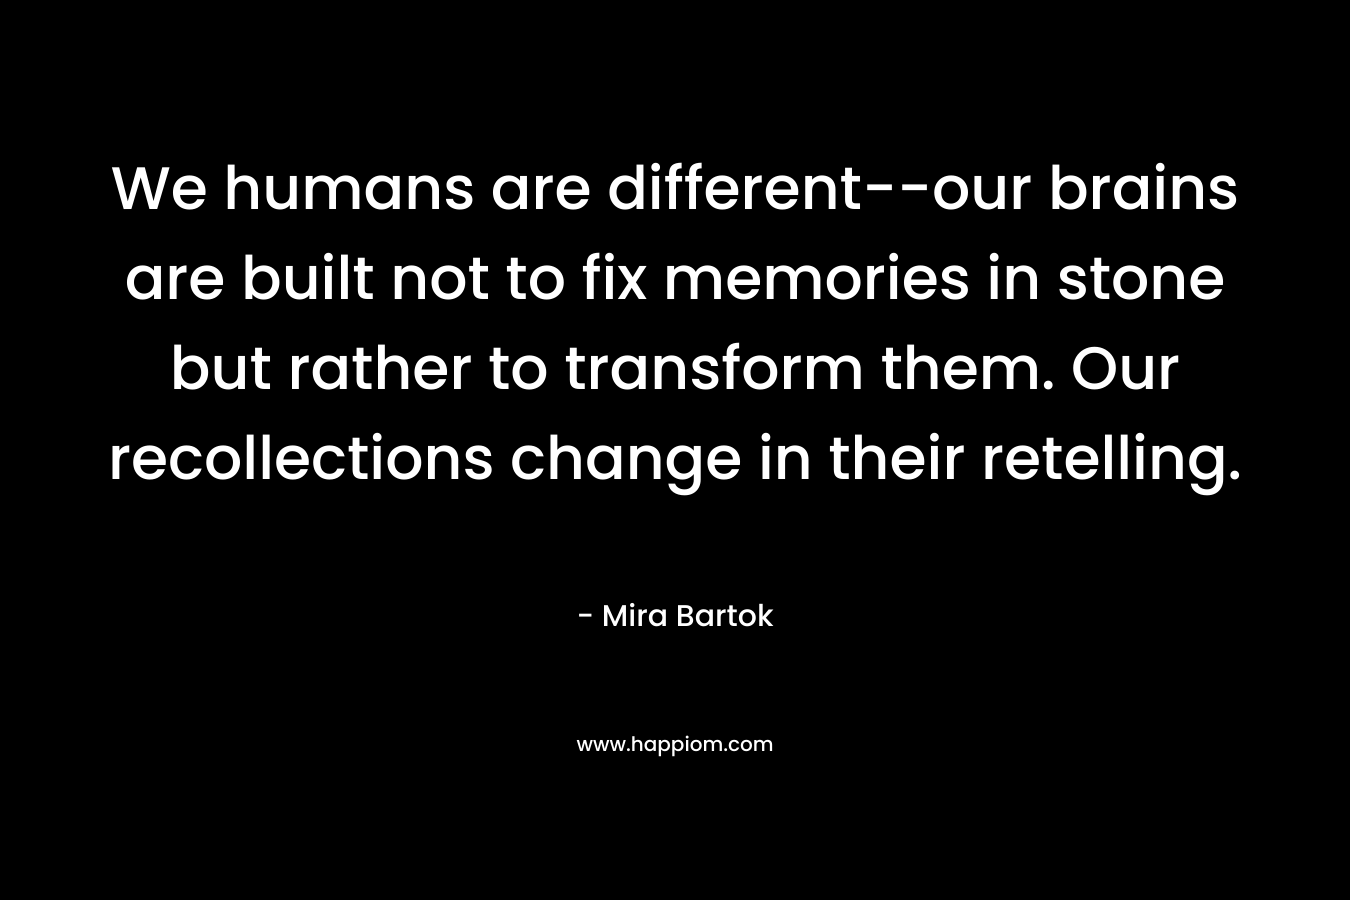 We humans are different–our brains are built not to fix memories in stone but rather to transform them. Our recollections change in their retelling. – Mira Bartok